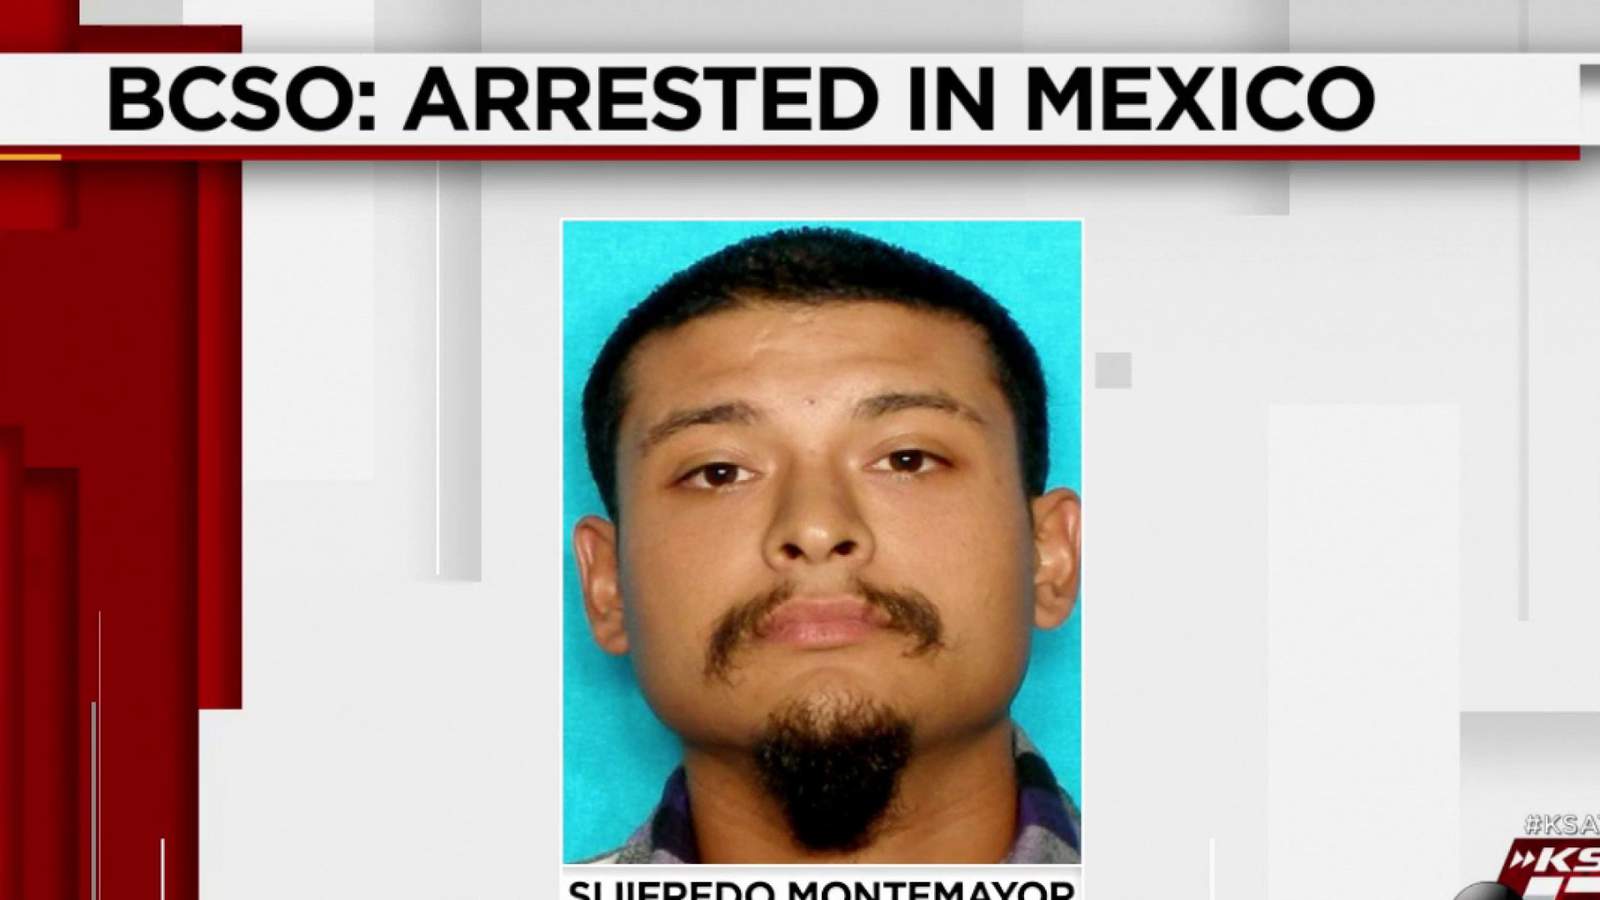 Suspect accused of shooting at Balcones Heights officer allegedly detained in Mexico, says sheriff